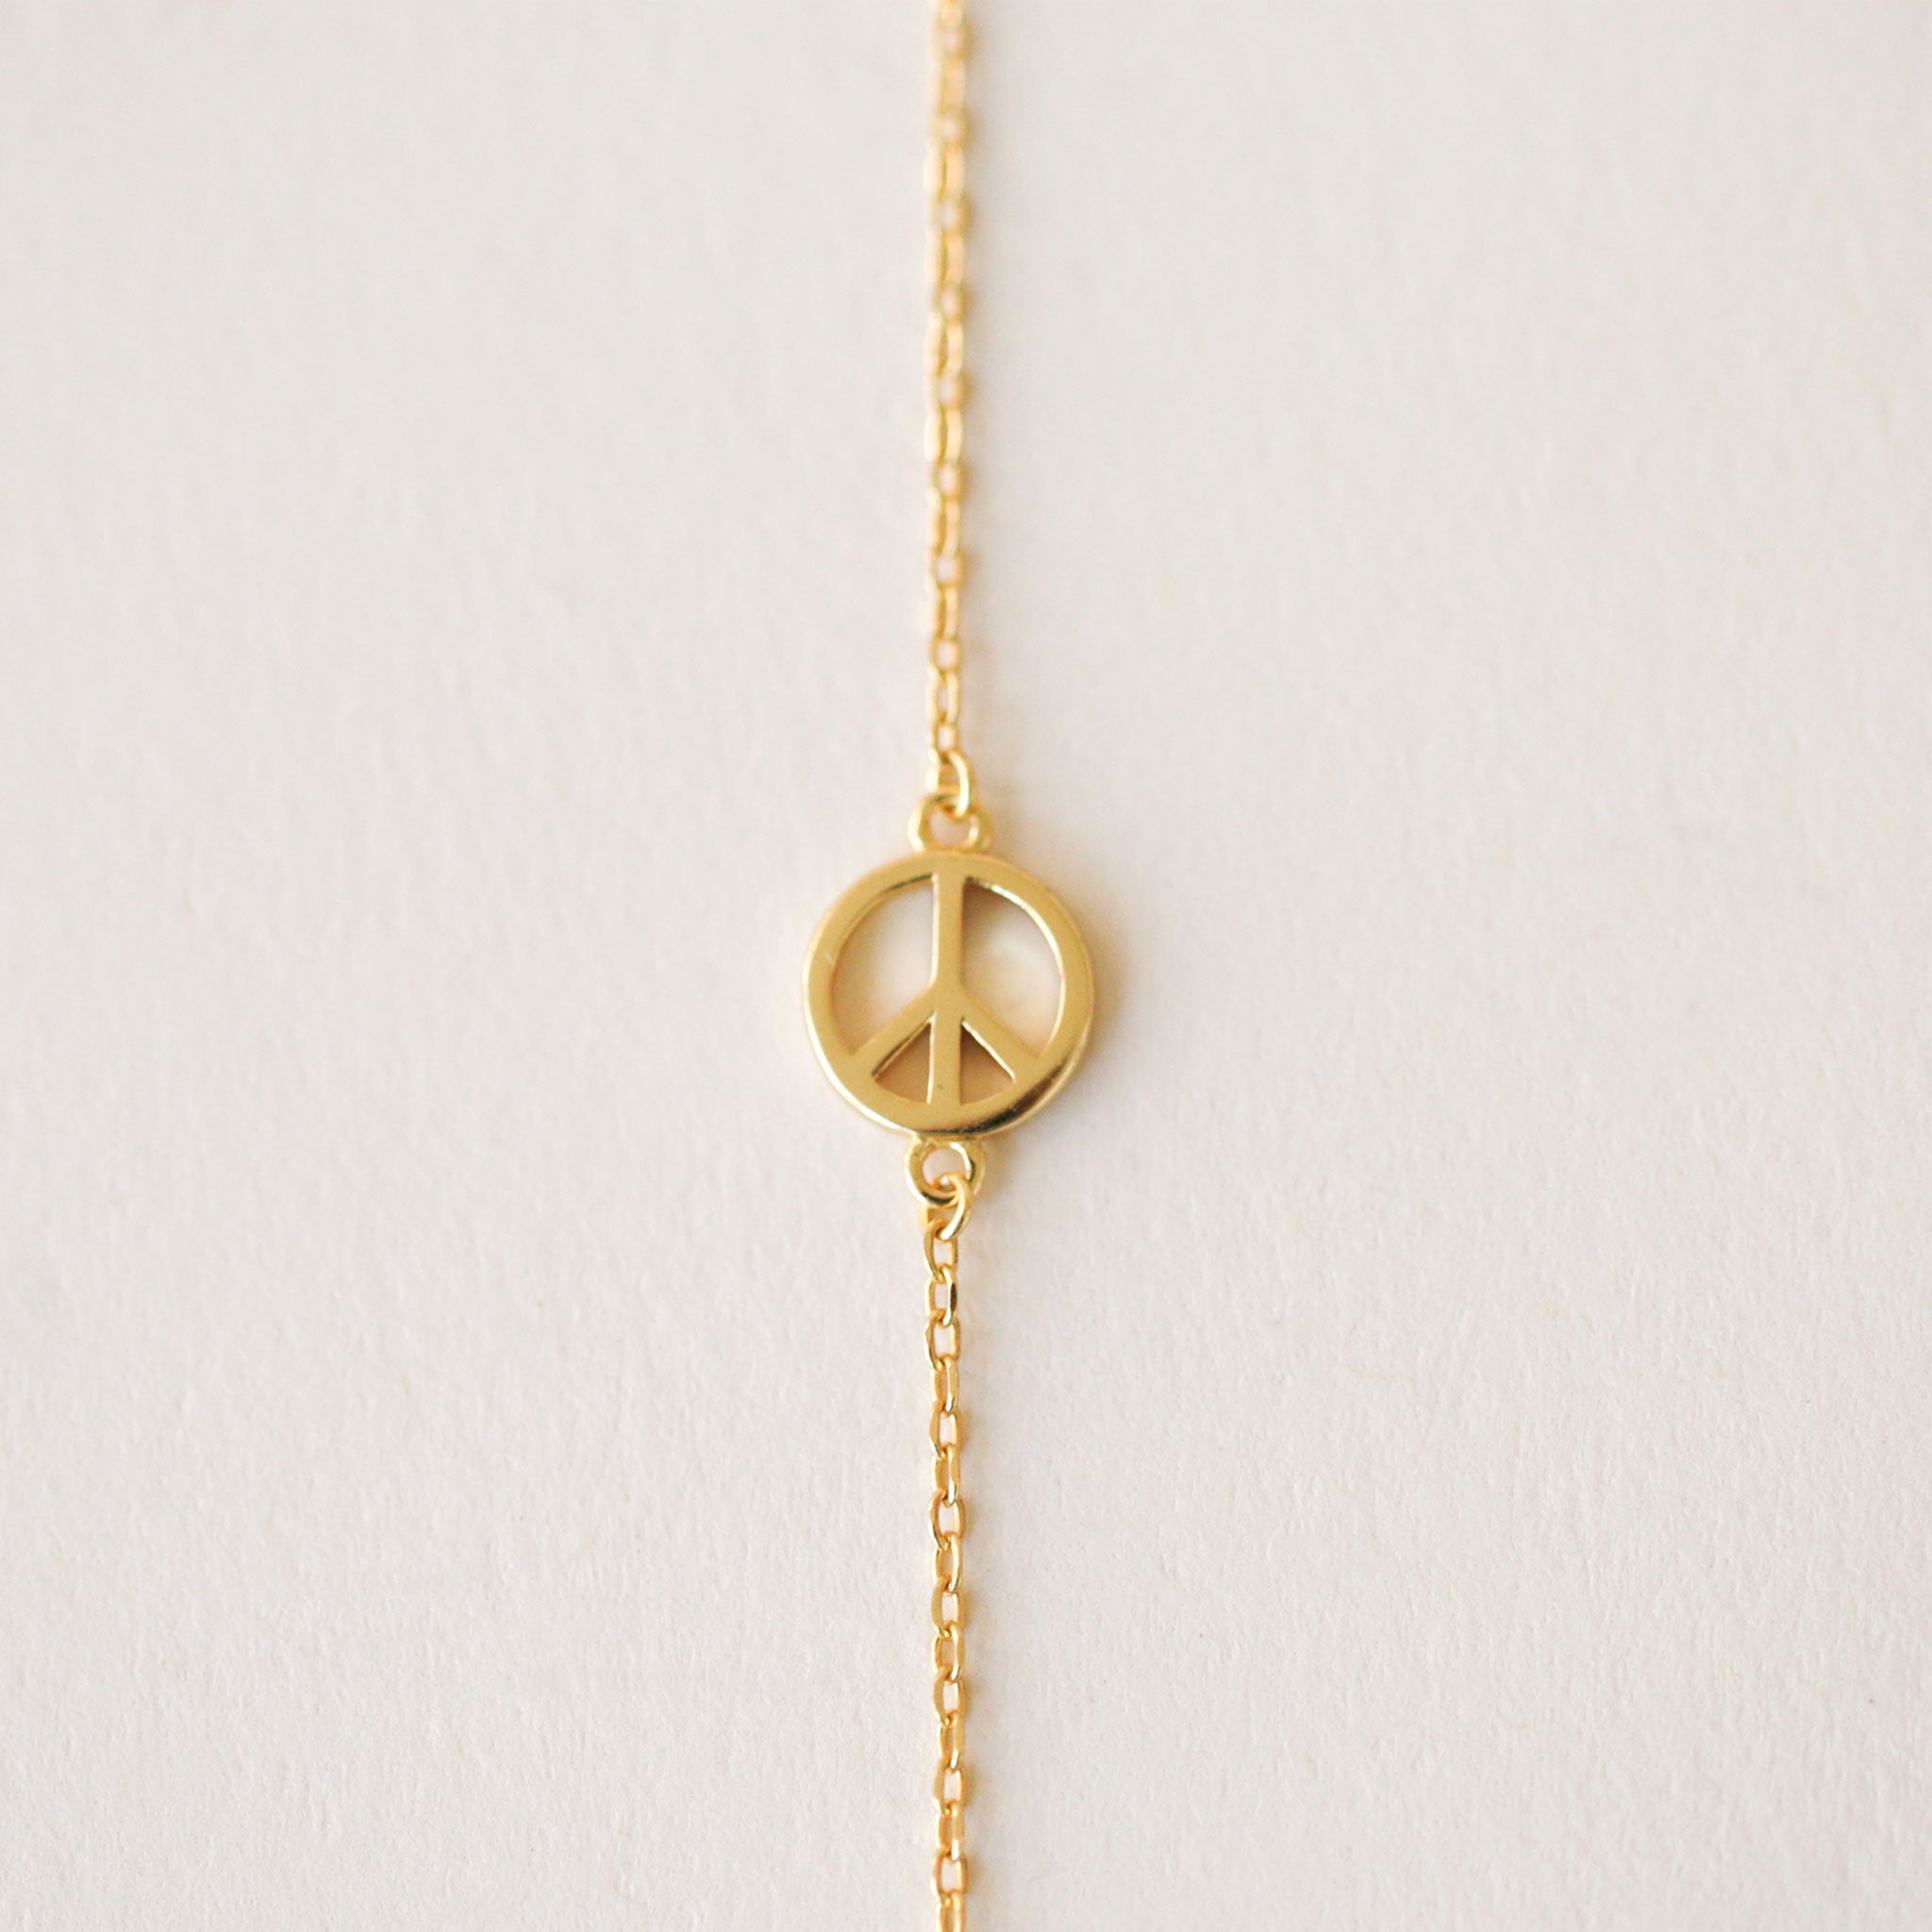 Gold chain necklace complete with classic peace sign symbol pendant. The pendent is connected to the chain by two loops on each side. 